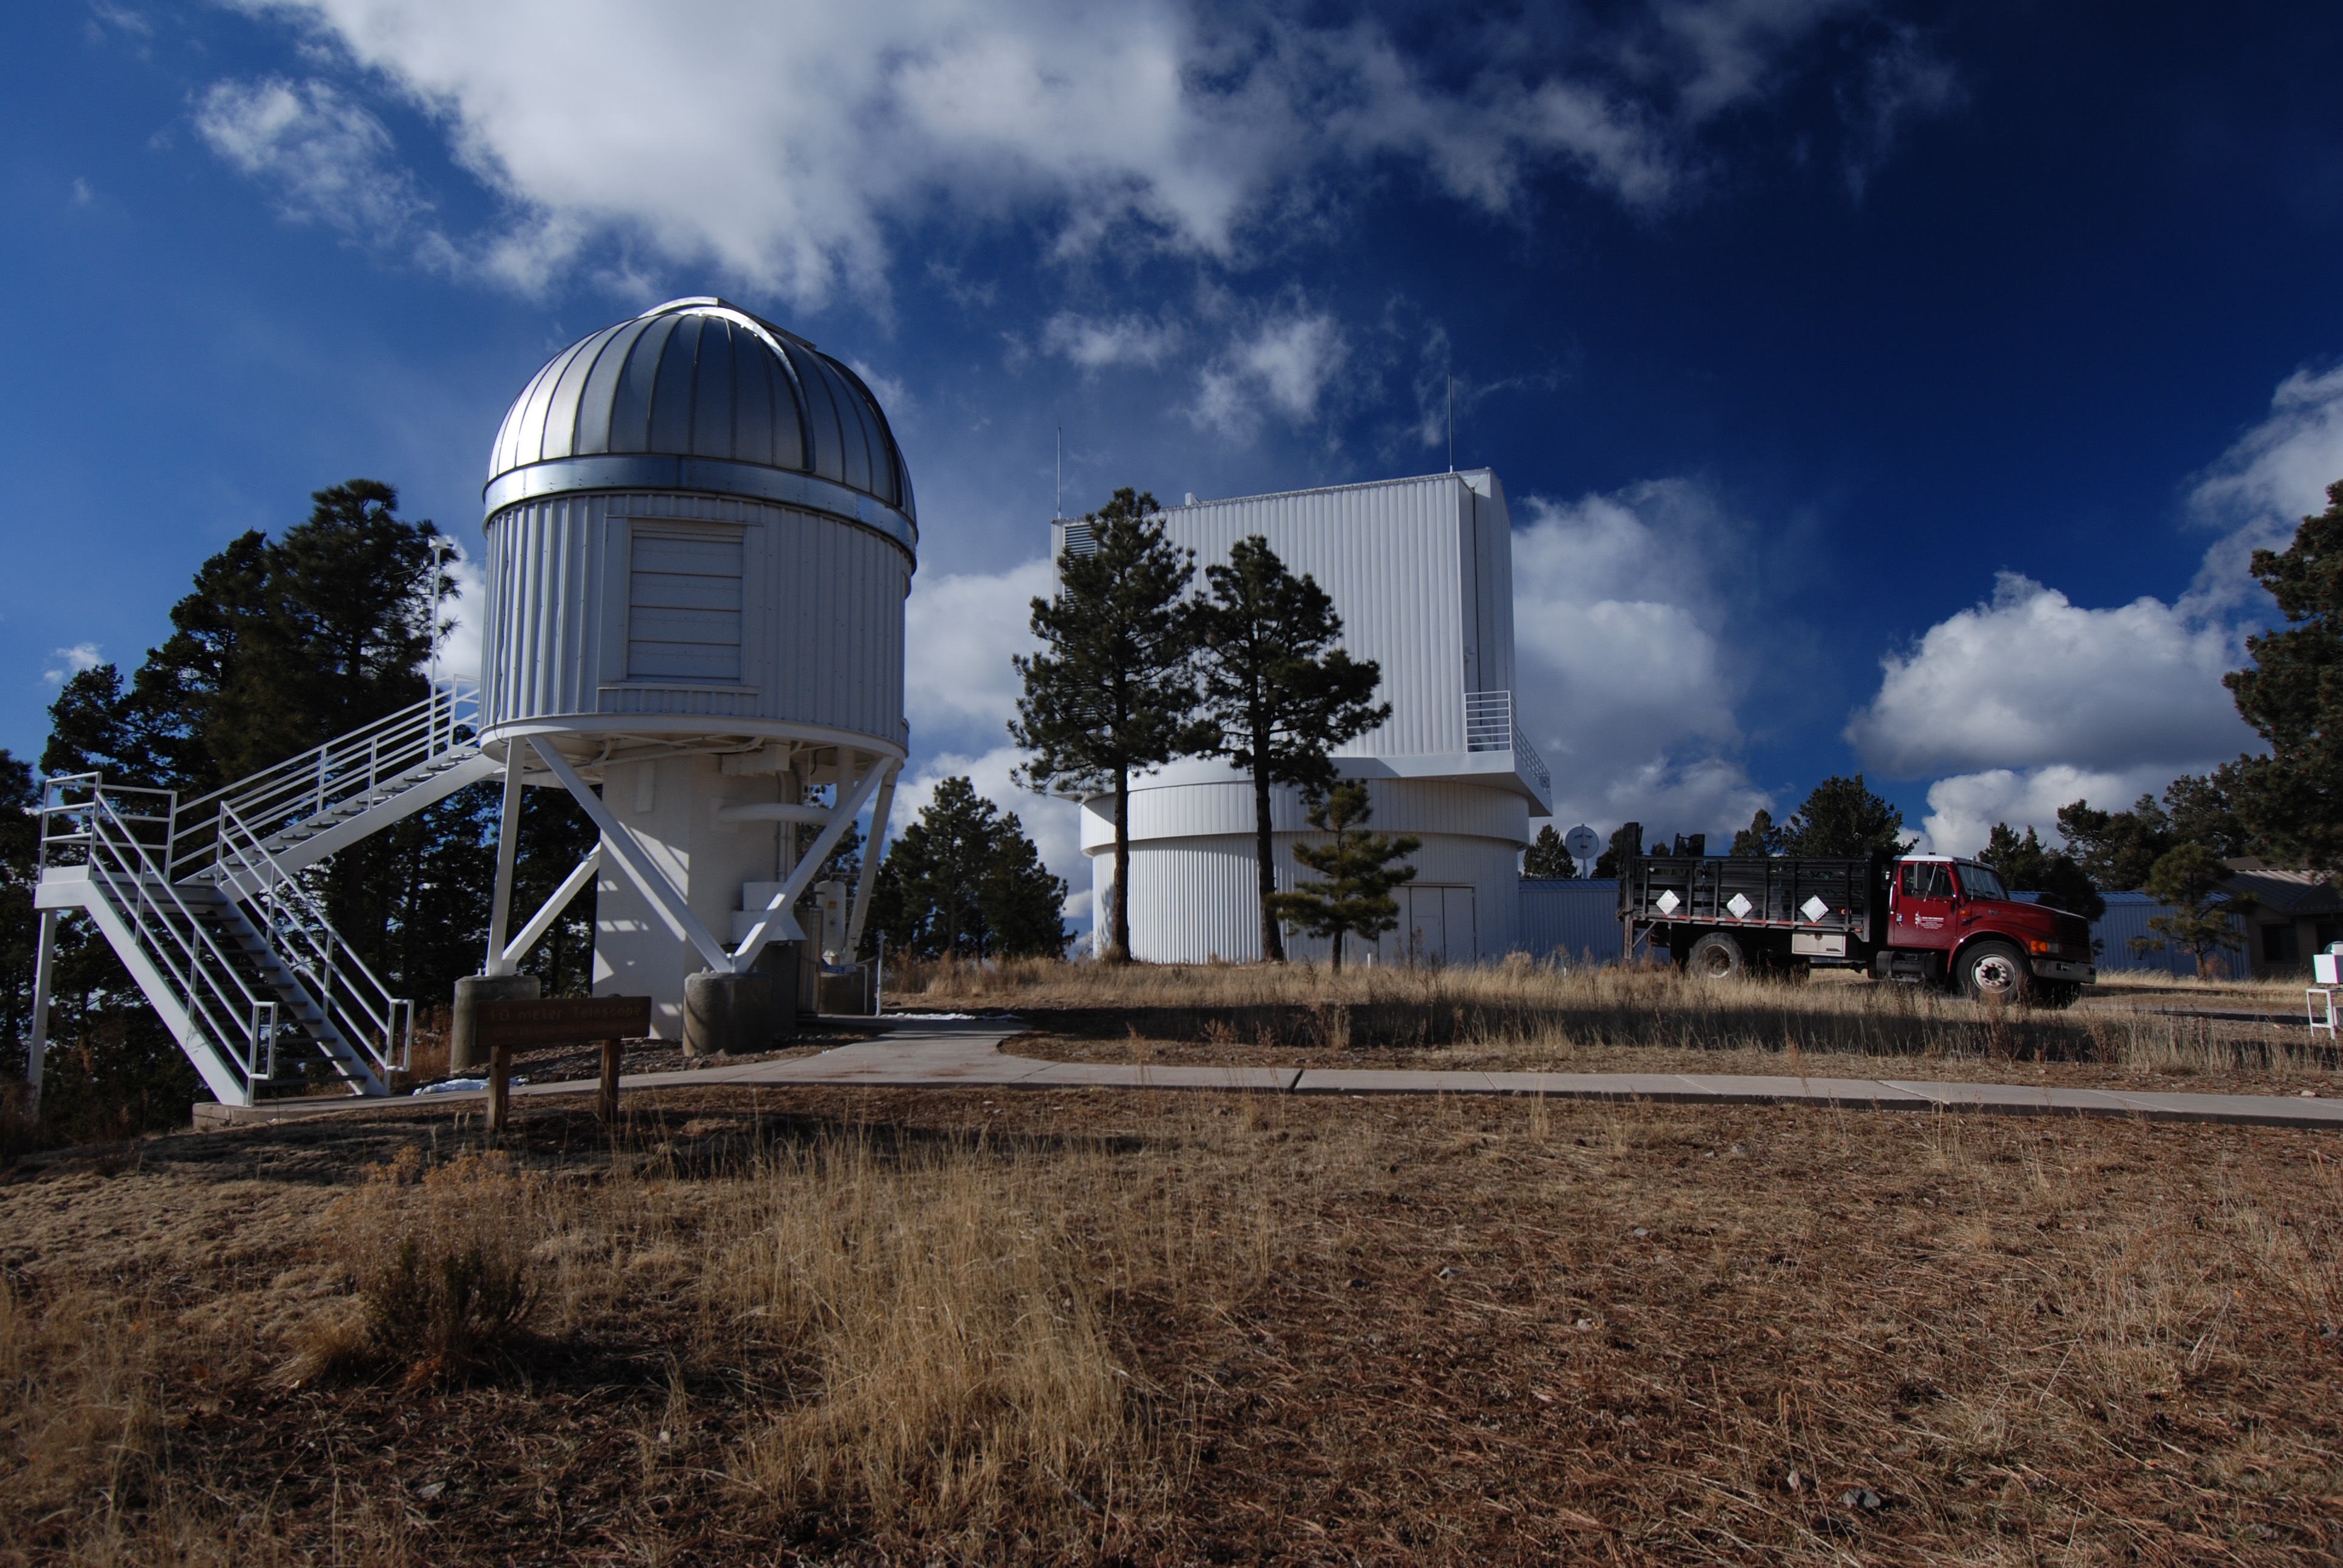 The NMSU 1 m dome at Apache Point Observatory in south east New Mexico in the south west of the United States. The larger enclosure in the background is the ARC 3.5 m telescope (image taken from <a target="_blank" href="http://adsabs.harvard.edu/abs/2010AdAst2010E..46H" rel="noopener noreferrer">Holtzman et al. 2010</a>).